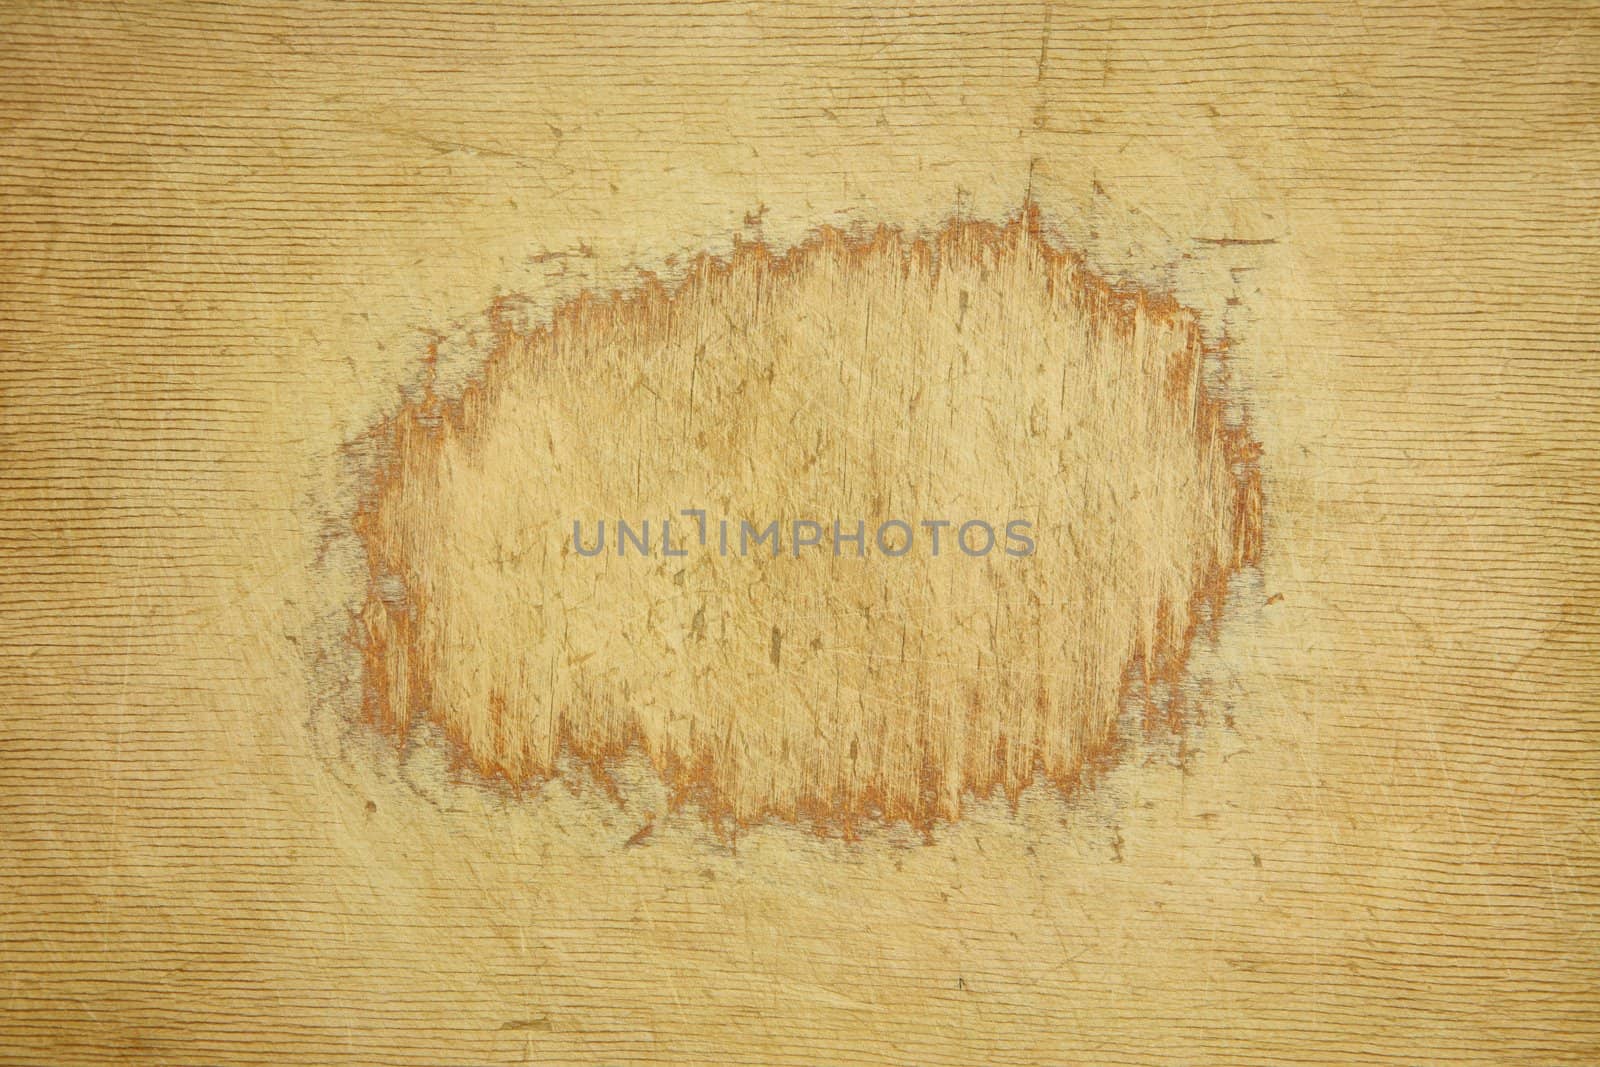 Texture to Old Wooden Surface of Board for Cutting of Food